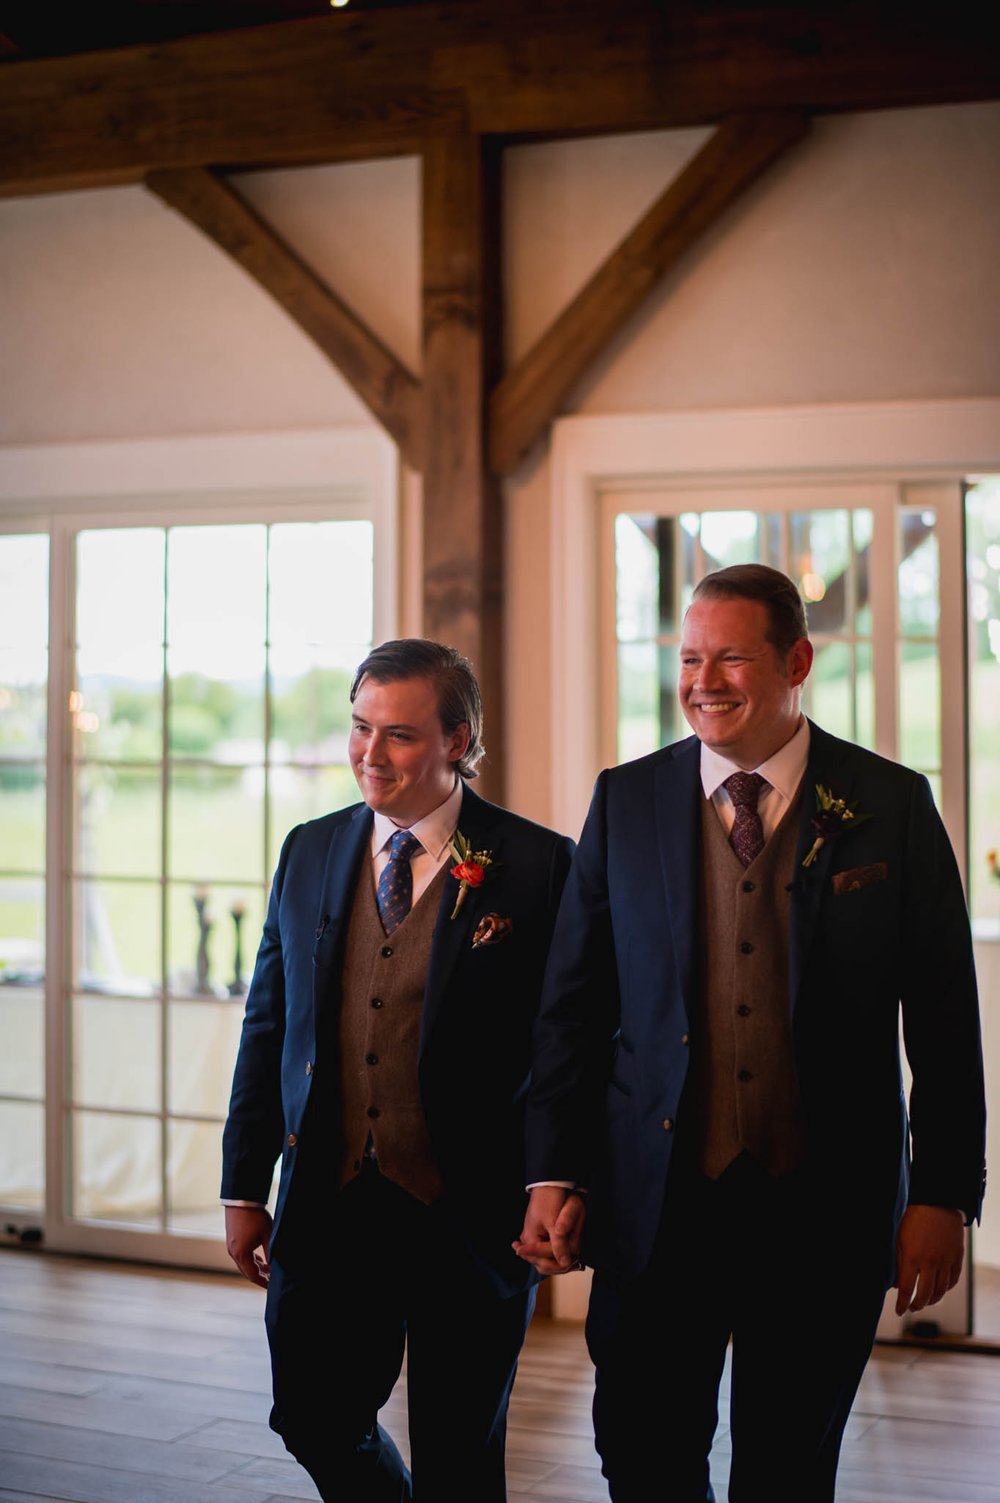 two grooms walk in smiling for their wedding ceremony